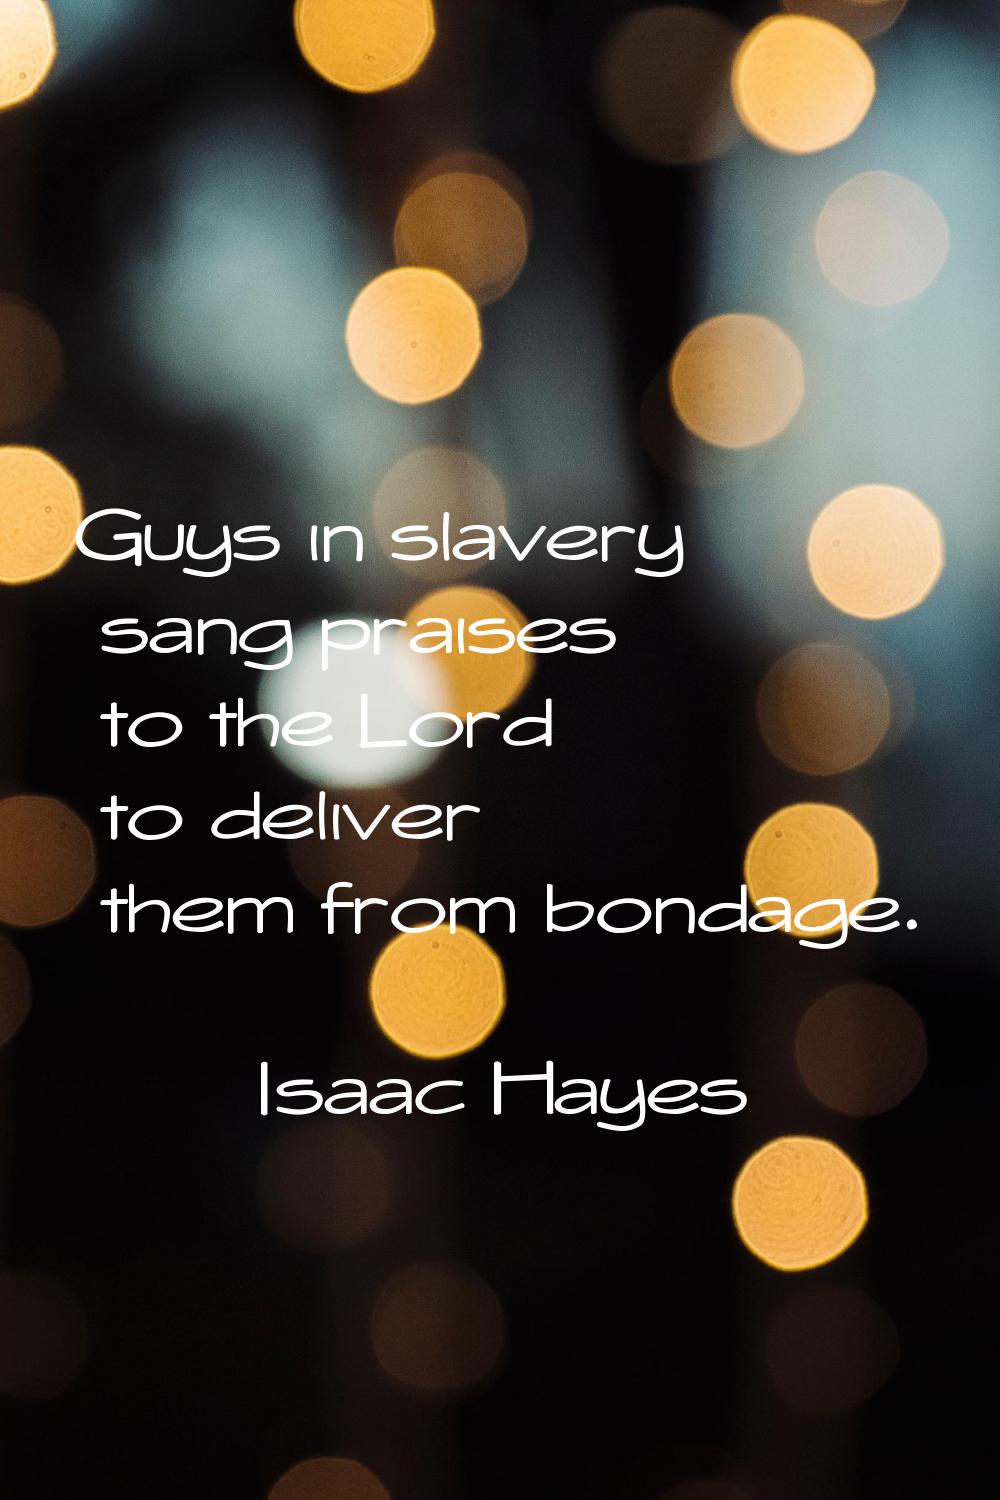 Guys in slavery sang praises to the Lord to deliver them from bondage.